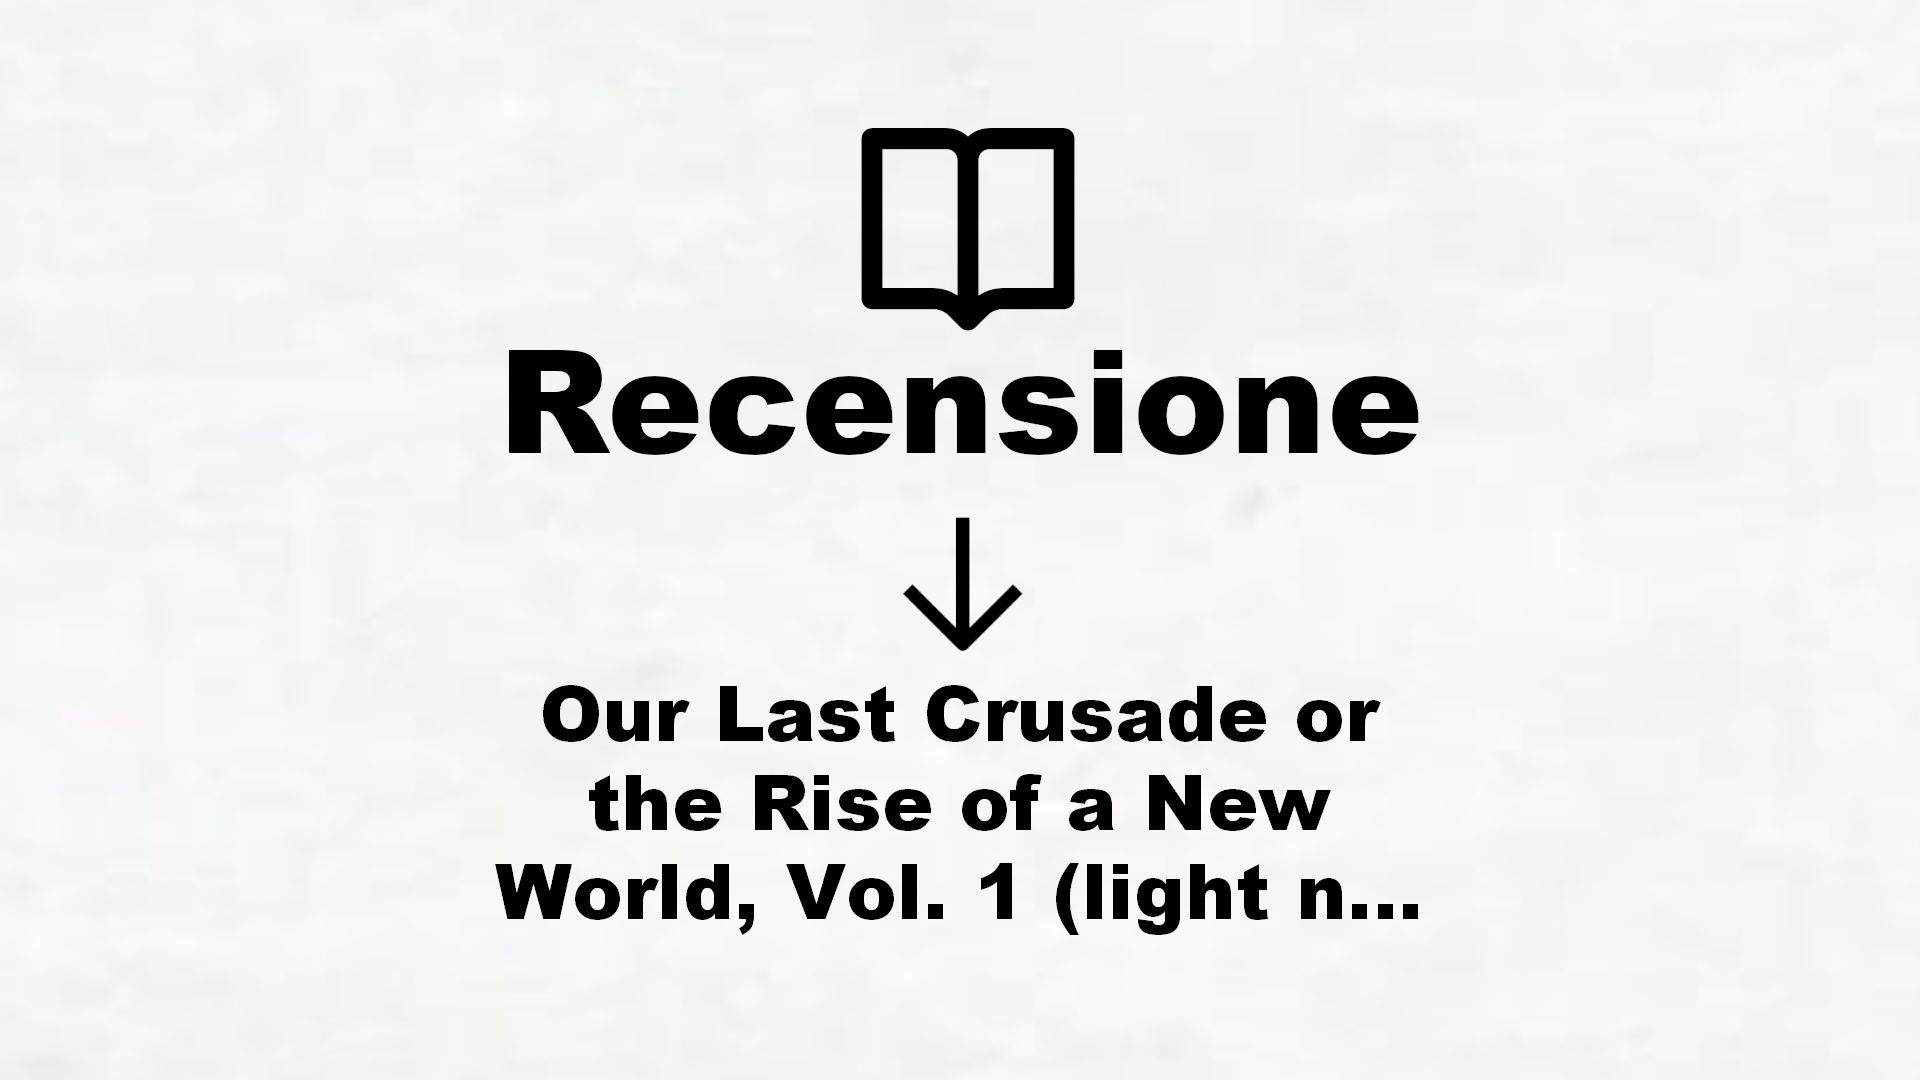 Our Last Crusade or the Rise of a New World, Vol. 1 (light novel) (The War Ends the World / Raises the World (light novel)) (English Edition) – Recensione Libro